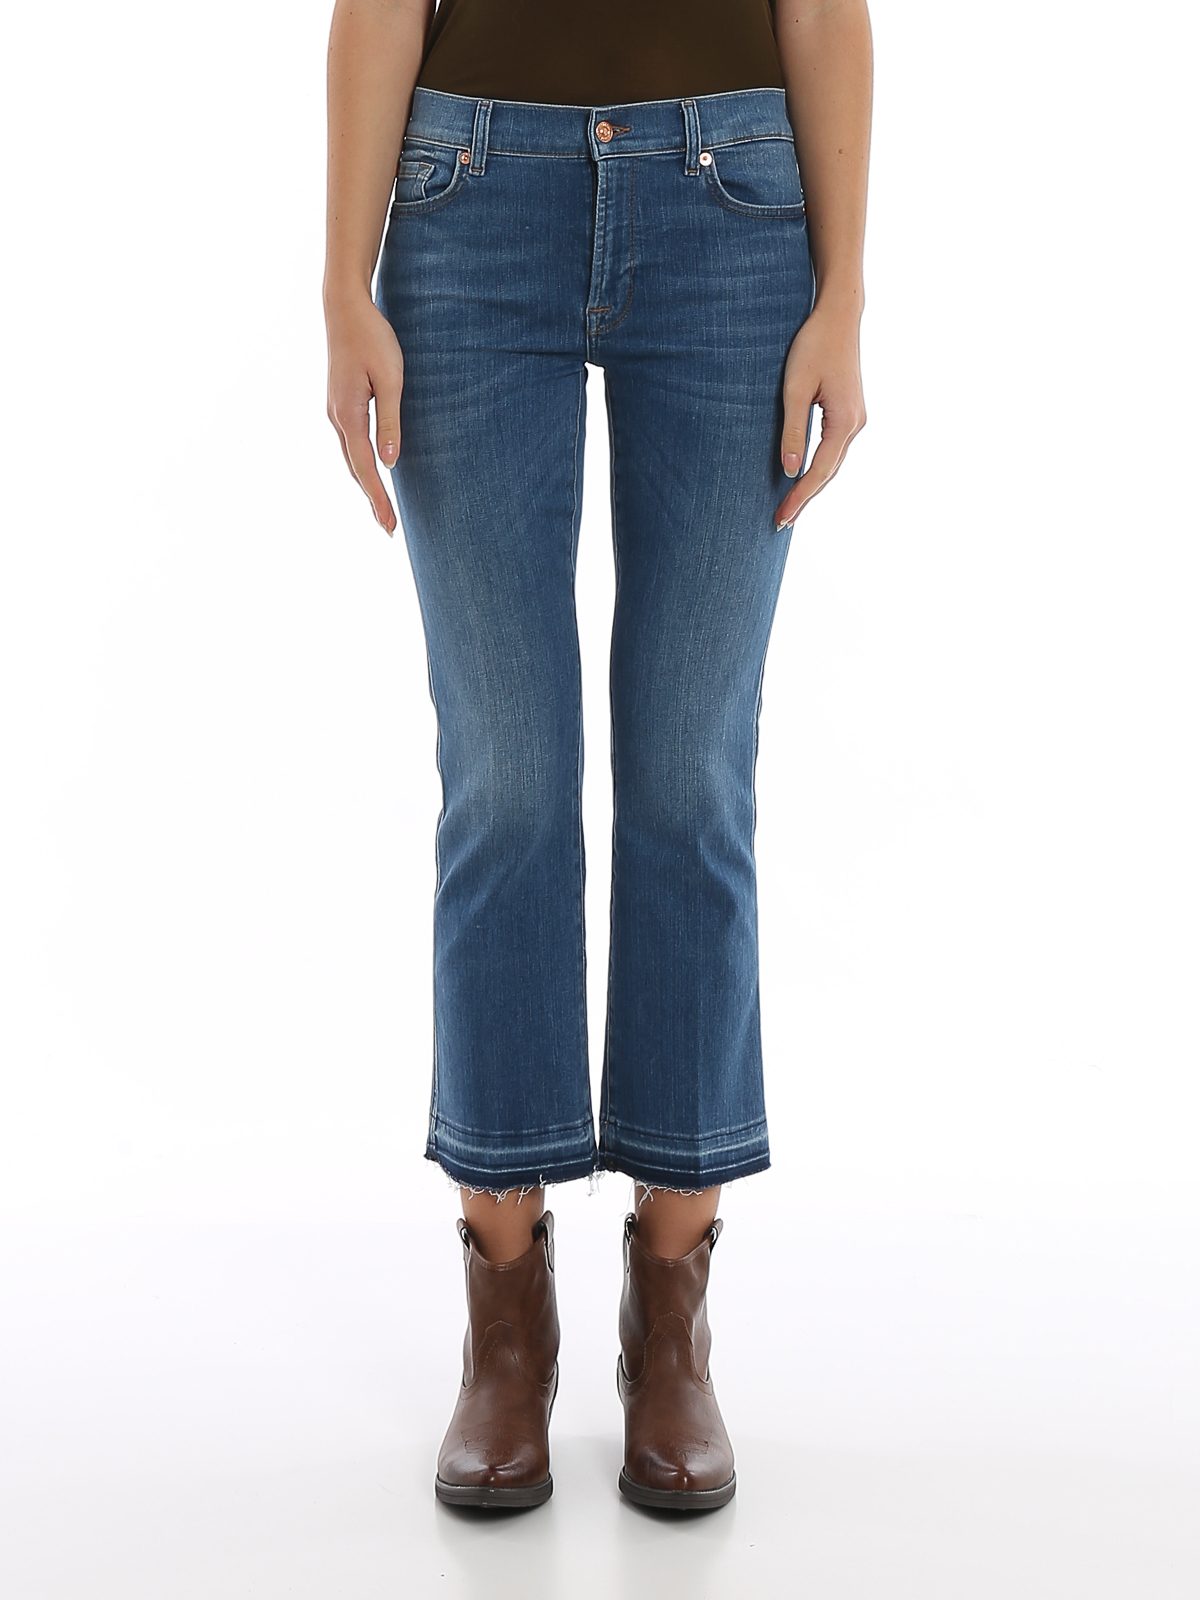 Beregning lort mave Bootcut jeans 7 For All Mankind - Faded bootcut cropped jeans -  JSYRU580PUMID